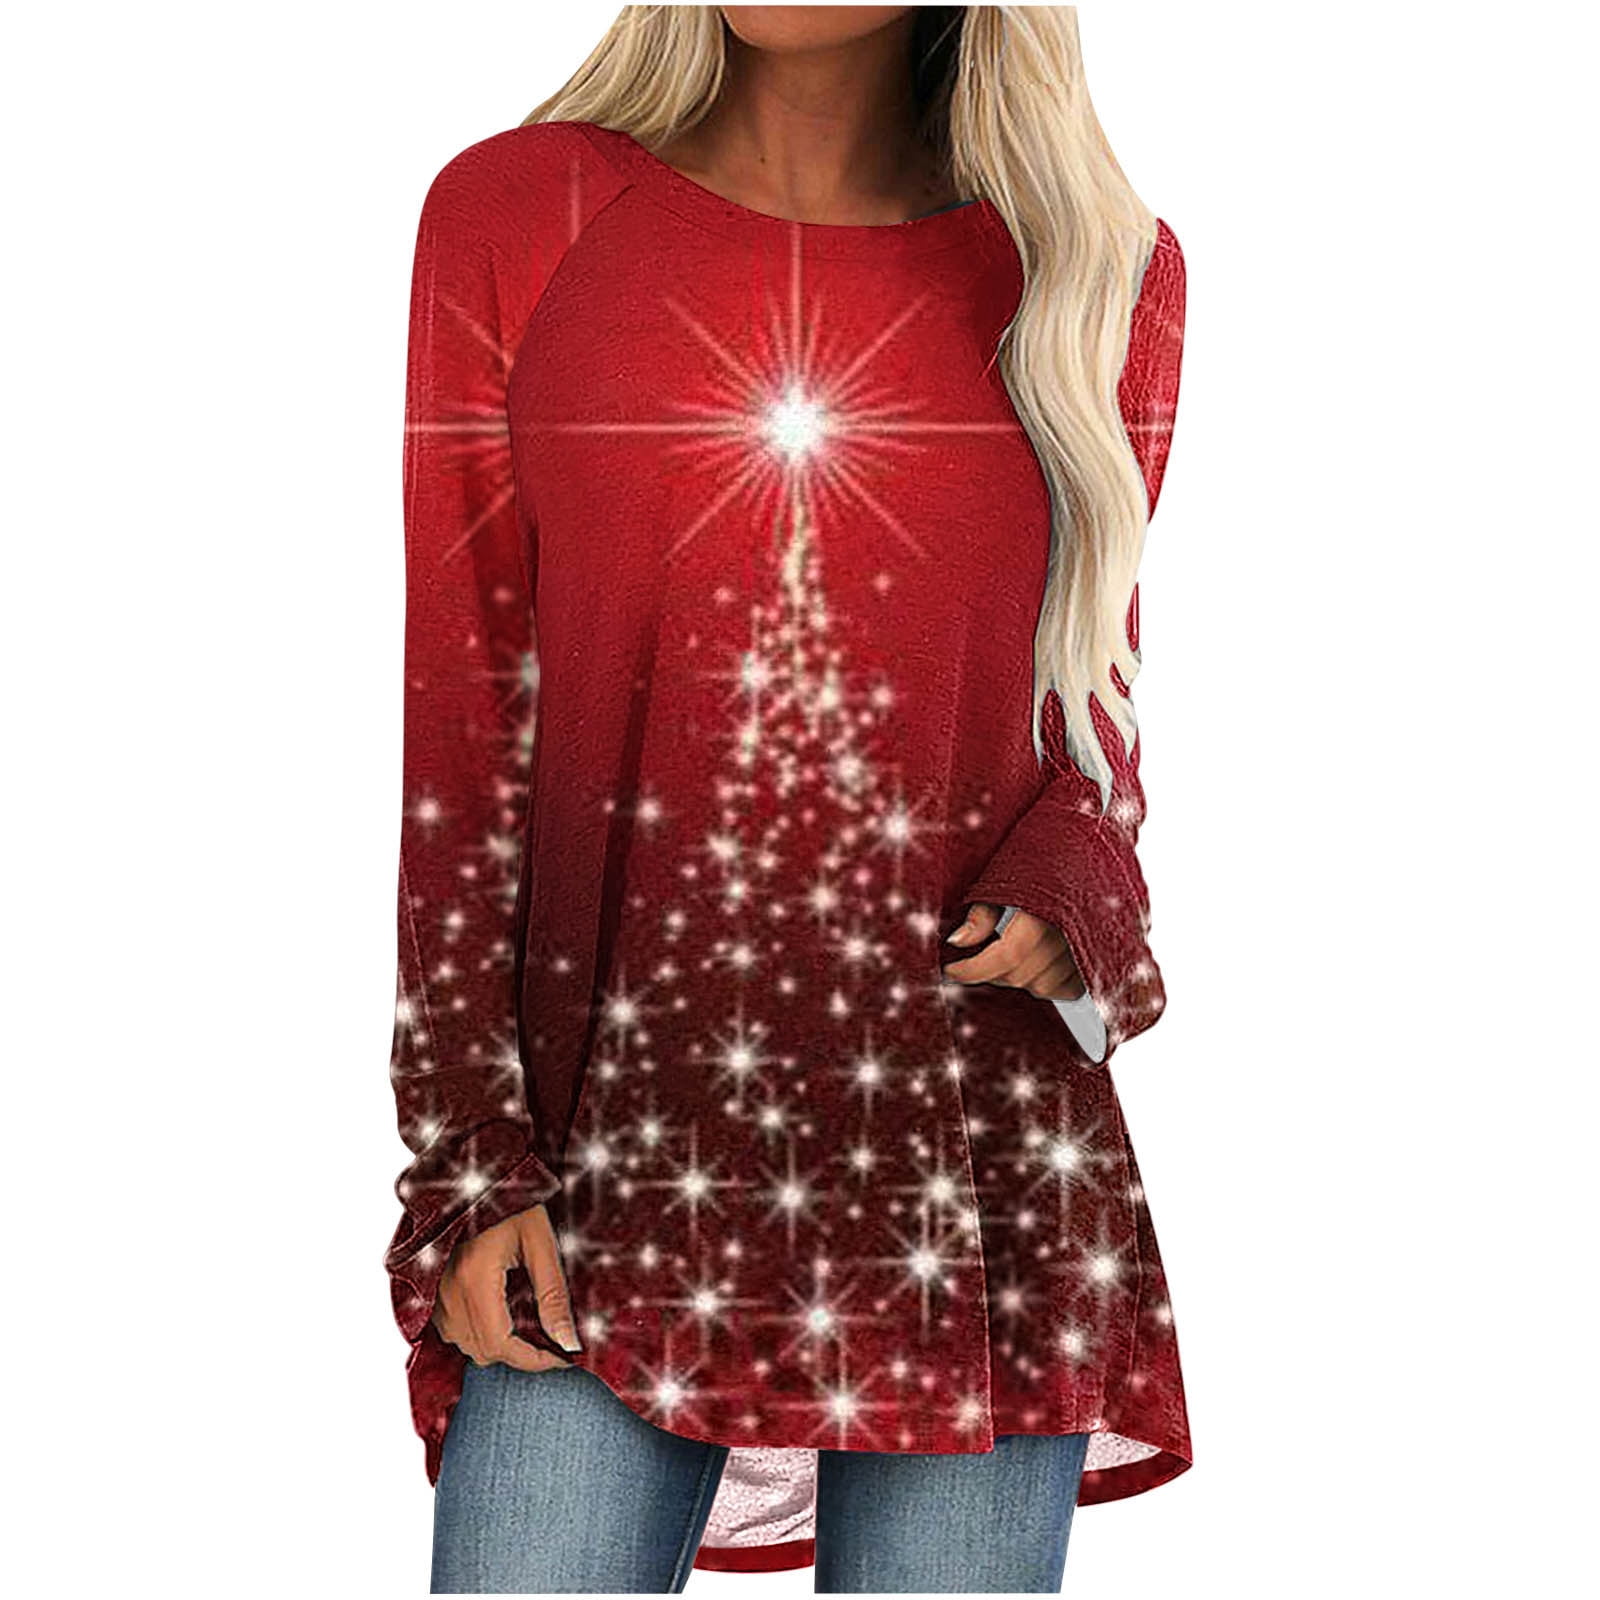 Boho Plus Size Christmas Pullover for Women,Long Sleeve Holiday Tunic ...